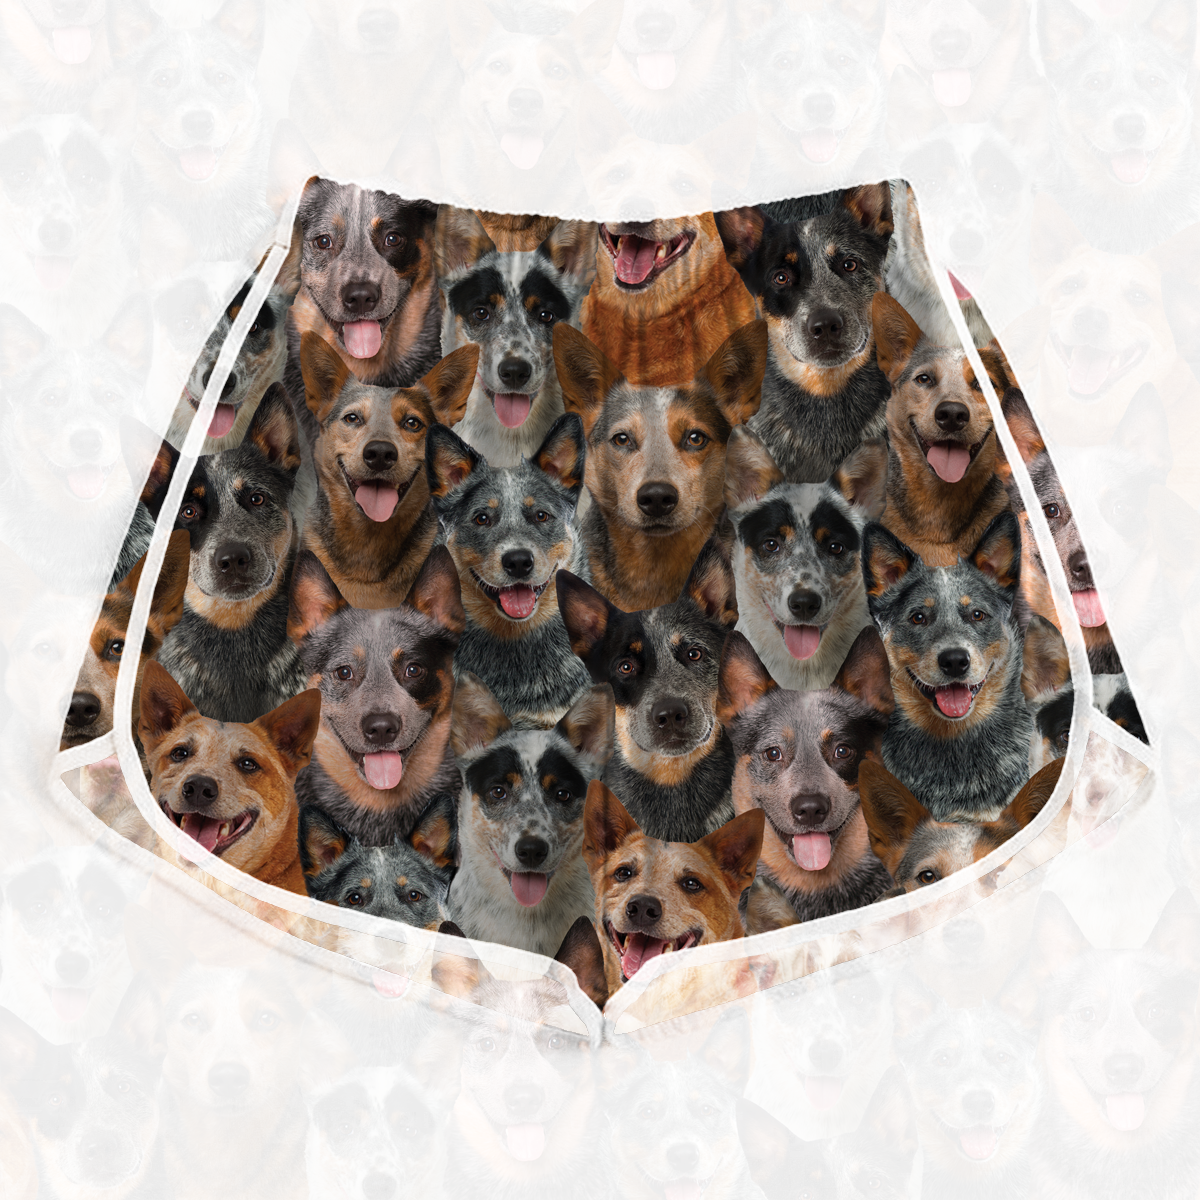 You Will Have A Bunch Of Australian Cattles - Women's Running Shorts V1